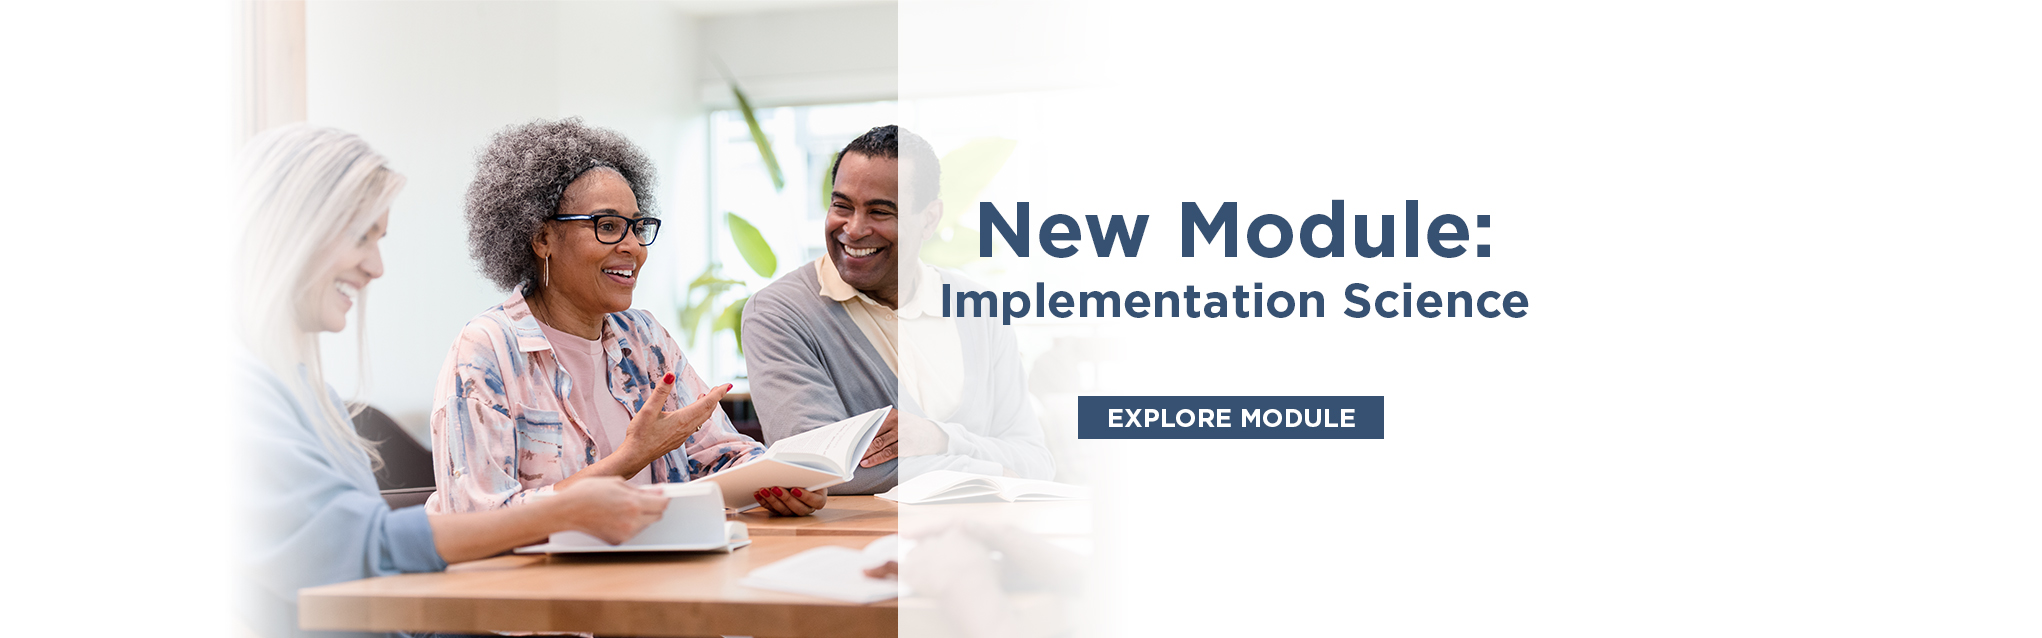 New Module: Implementation Science